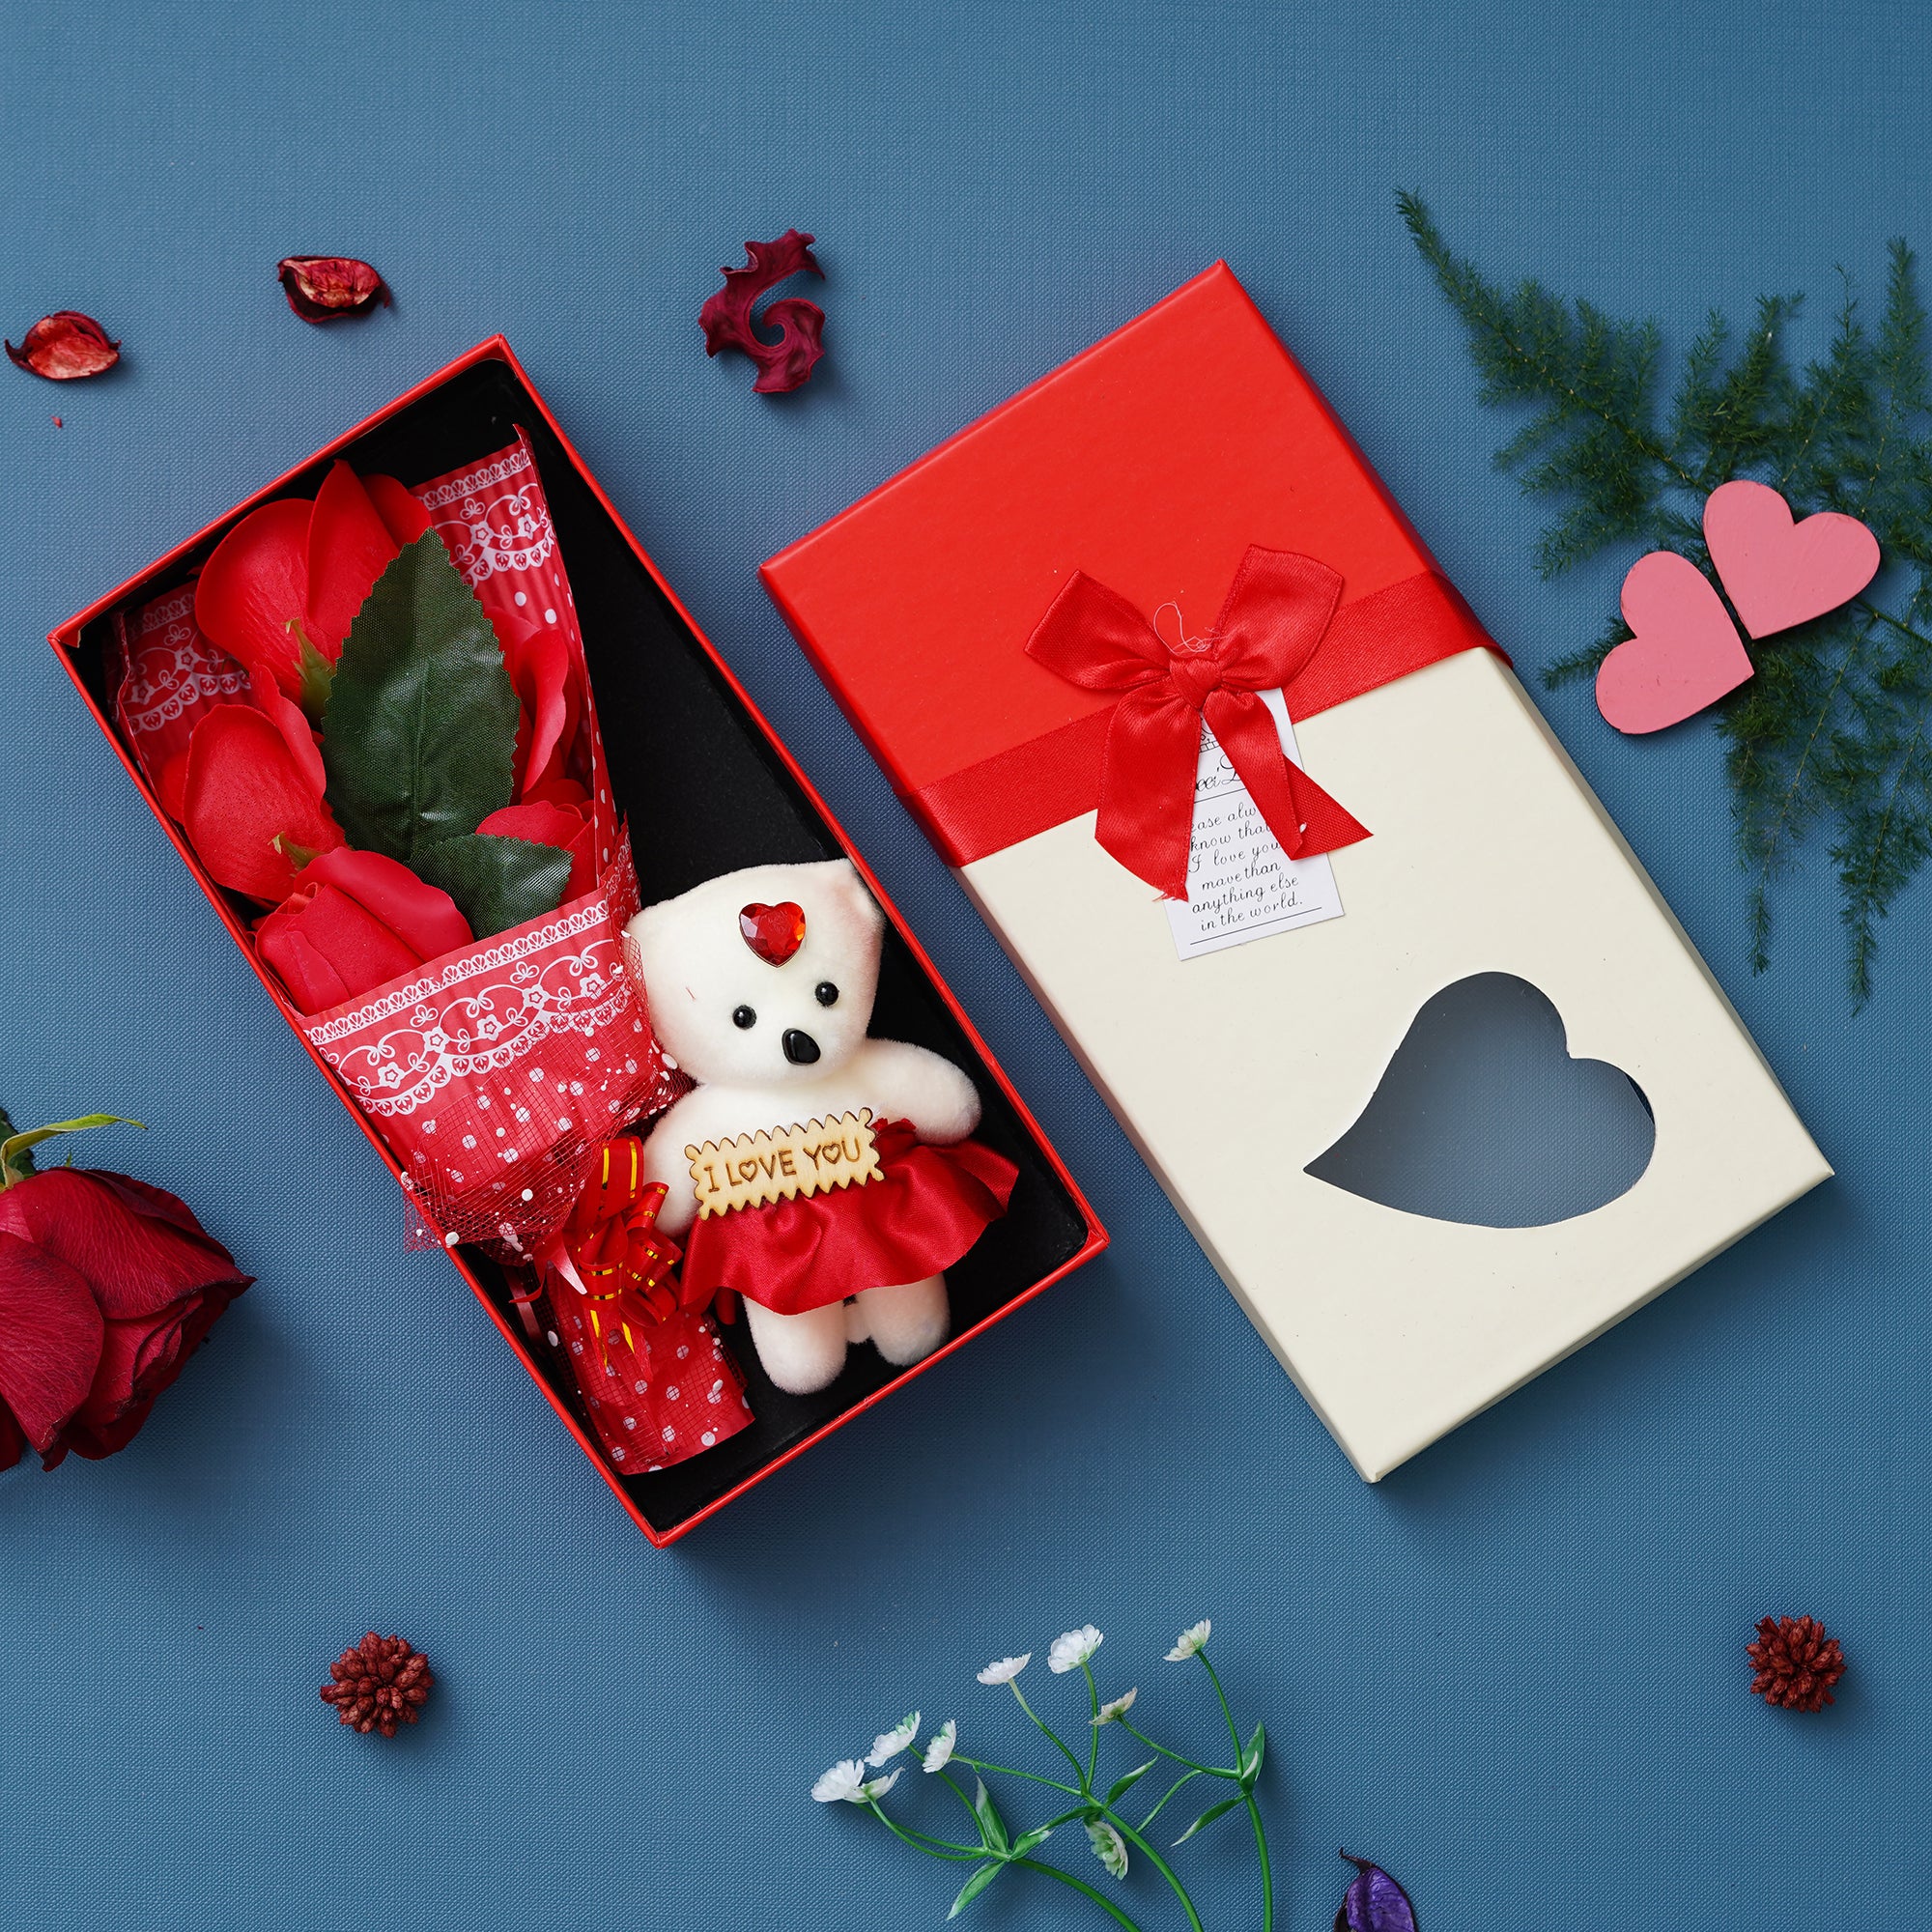 Valentine Combo of Pack of 8 Love Gift Cards, "Love" Animated Characters Showpiece, Red Roses Bouquet and White, Red Teddy Bear Valentine's Rectangle Shaped Gift Box 5